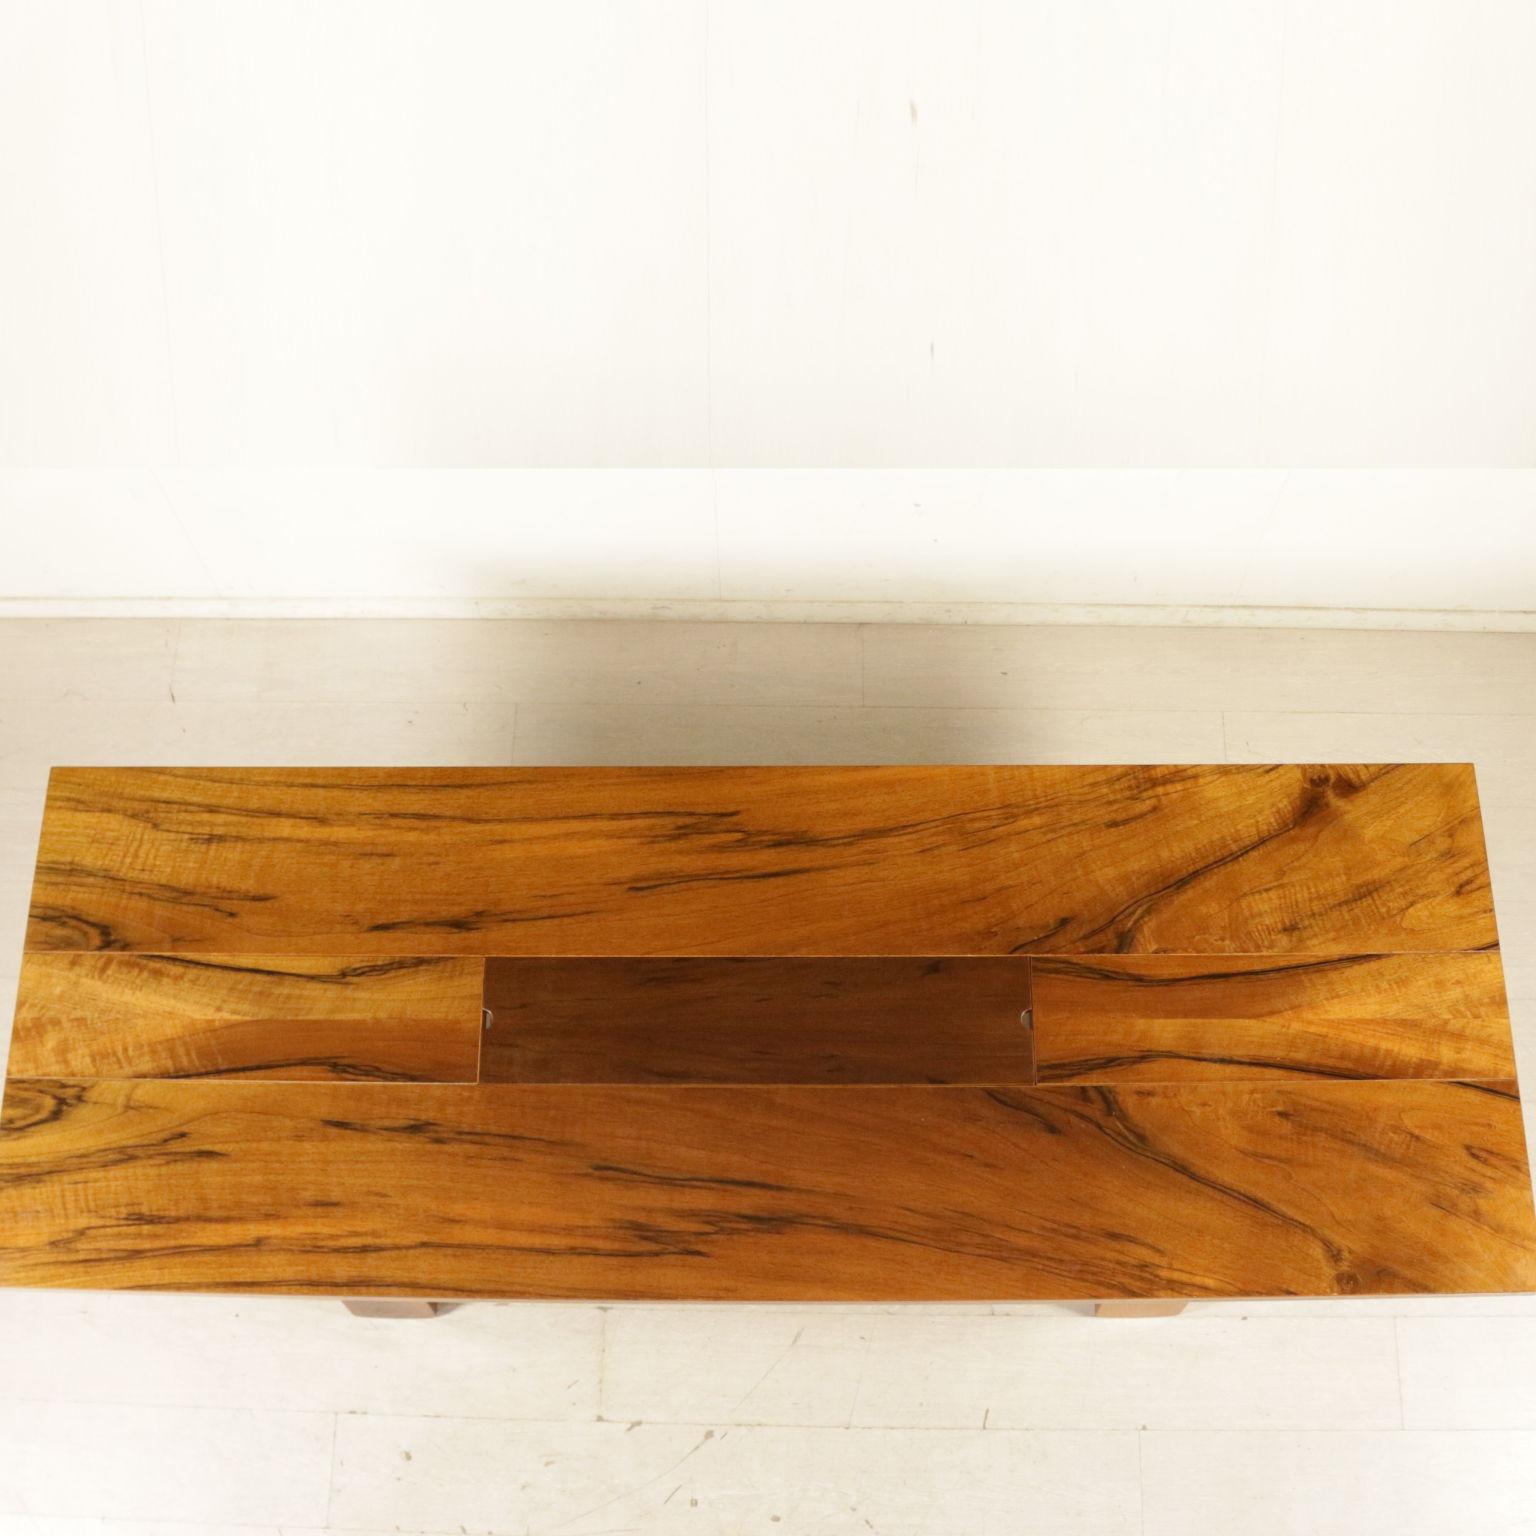 Walnut Table by Silvio Coppola Ceramic Solid Wood Vintage Italy 1960s-1970s